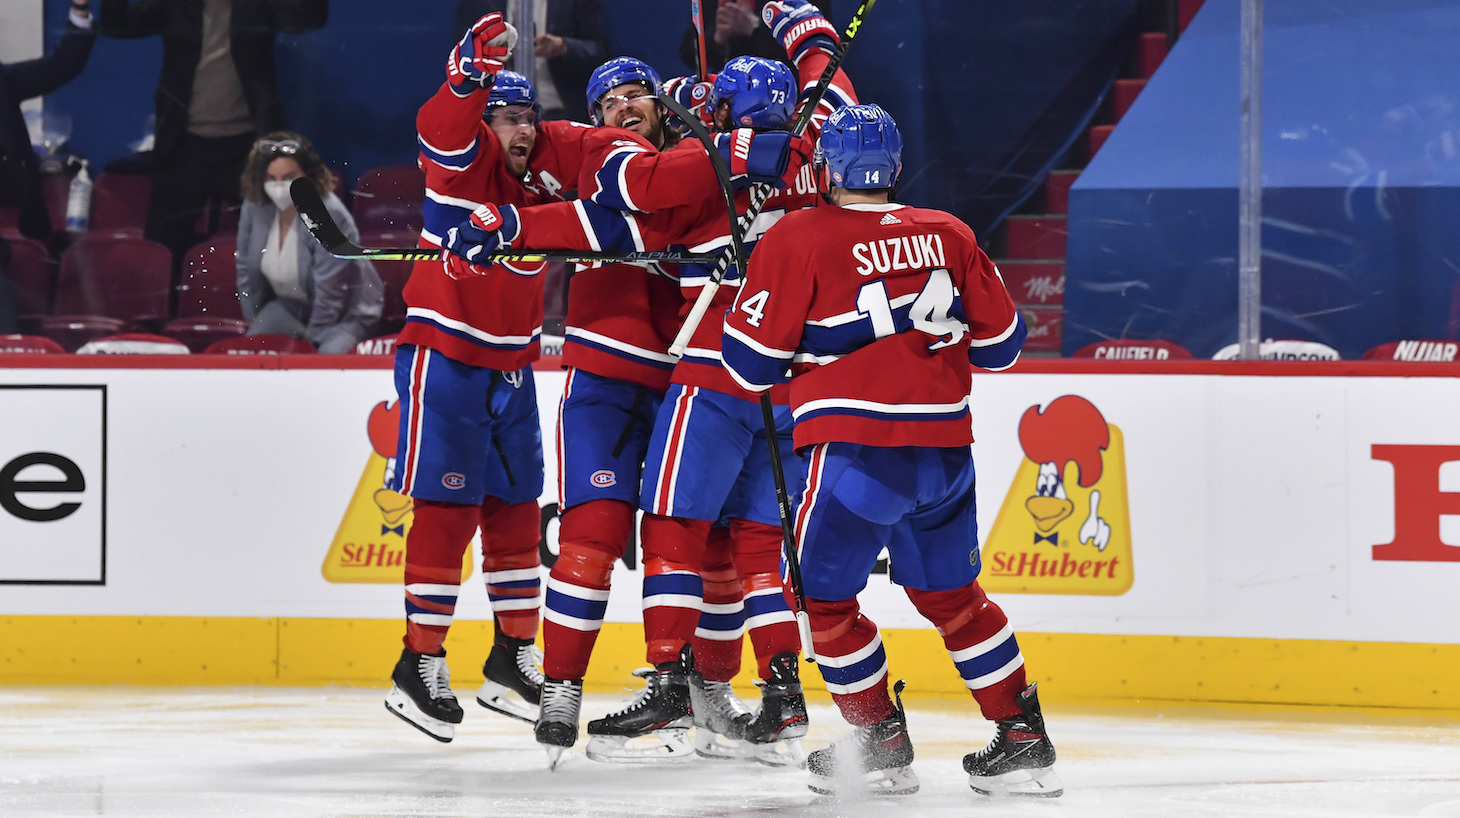 MONTREAL, QC - JUNE 07: The Montreal Canadiens celebrate an overtime victory against the Winnipeg Jets in Game Four of the Second Round of the 2021 Stanley Cup Playoffs at the Bell Centre on June 7, 2021 in Montreal, Canada. The Montreal Canadiens defeated the Winnipeg Jets 3-2 in overtime and eliminate them with a 4-0 series win. (Photo by Minas Panagiotakis/Getty Images)